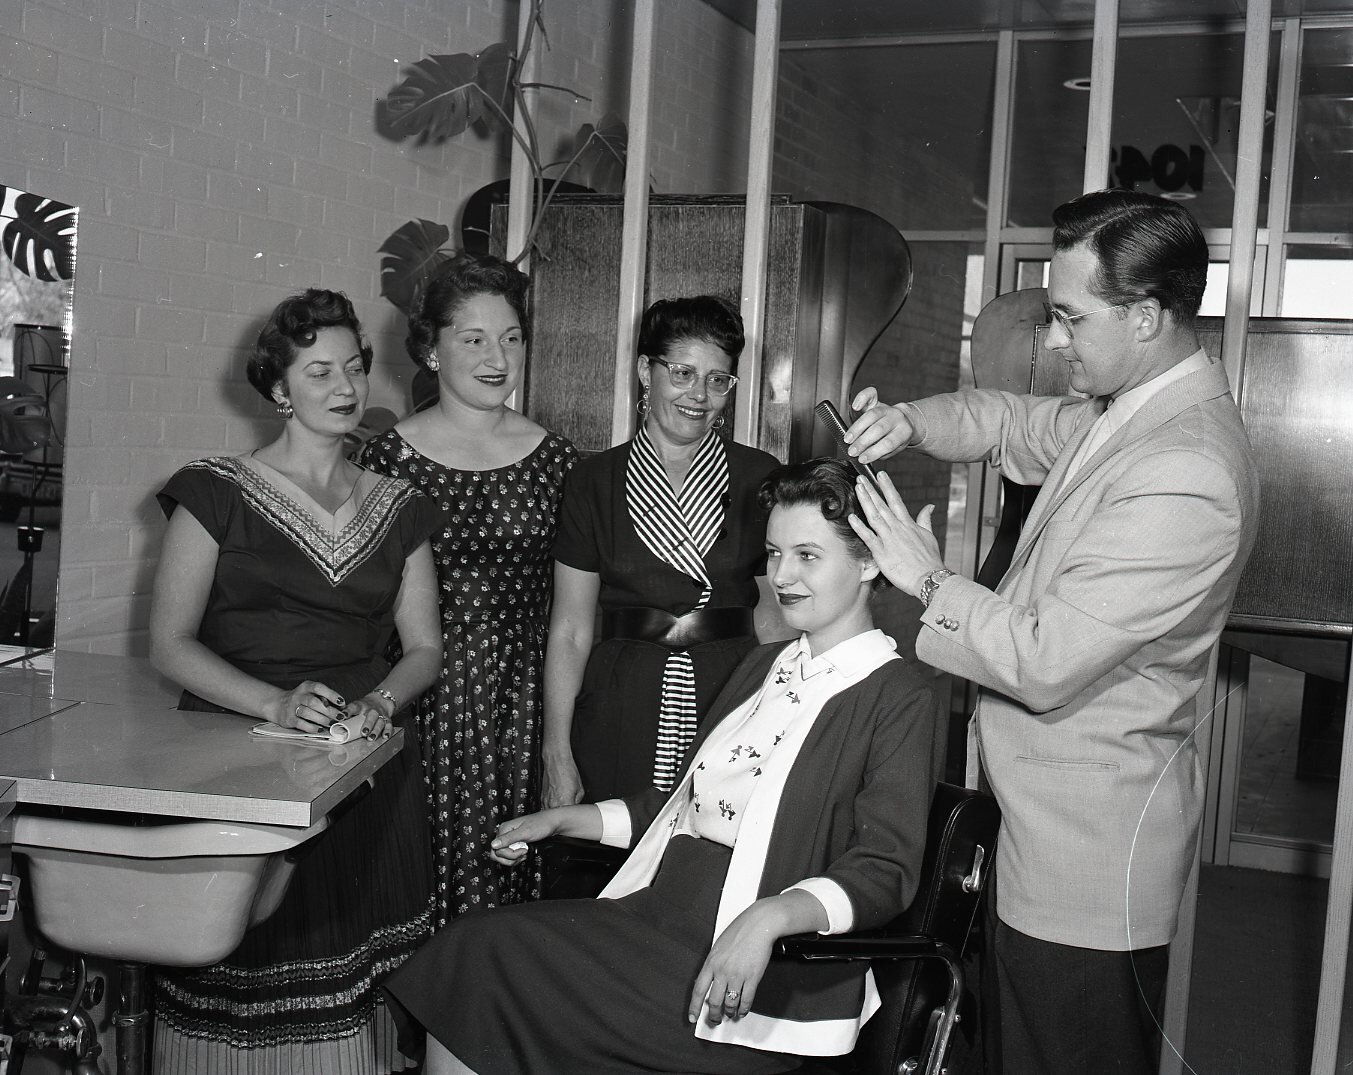 Women getting their hair done at Clell's Beauty Salon